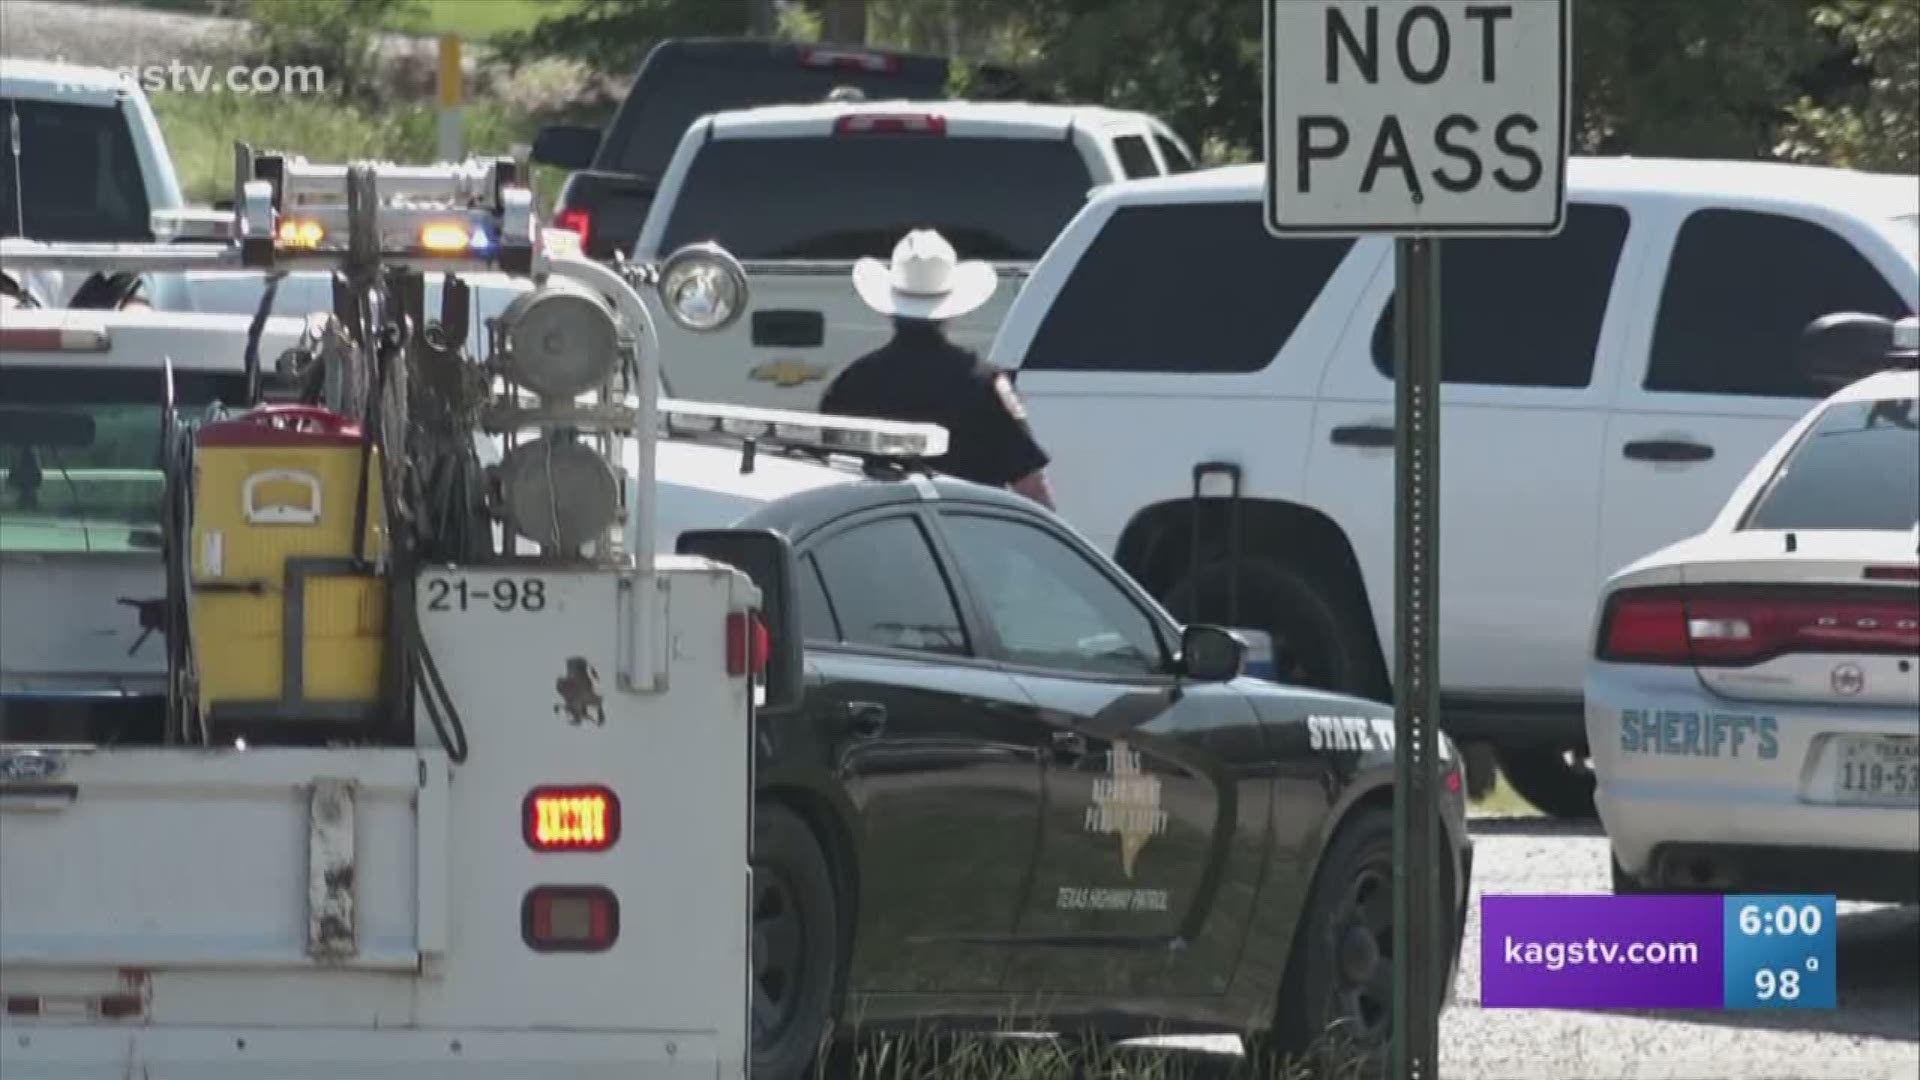 Brazos County Sheriff's Department and DPS are responding to a SWAT scene in Brazos County. Kacey Bowen has more from the scene.